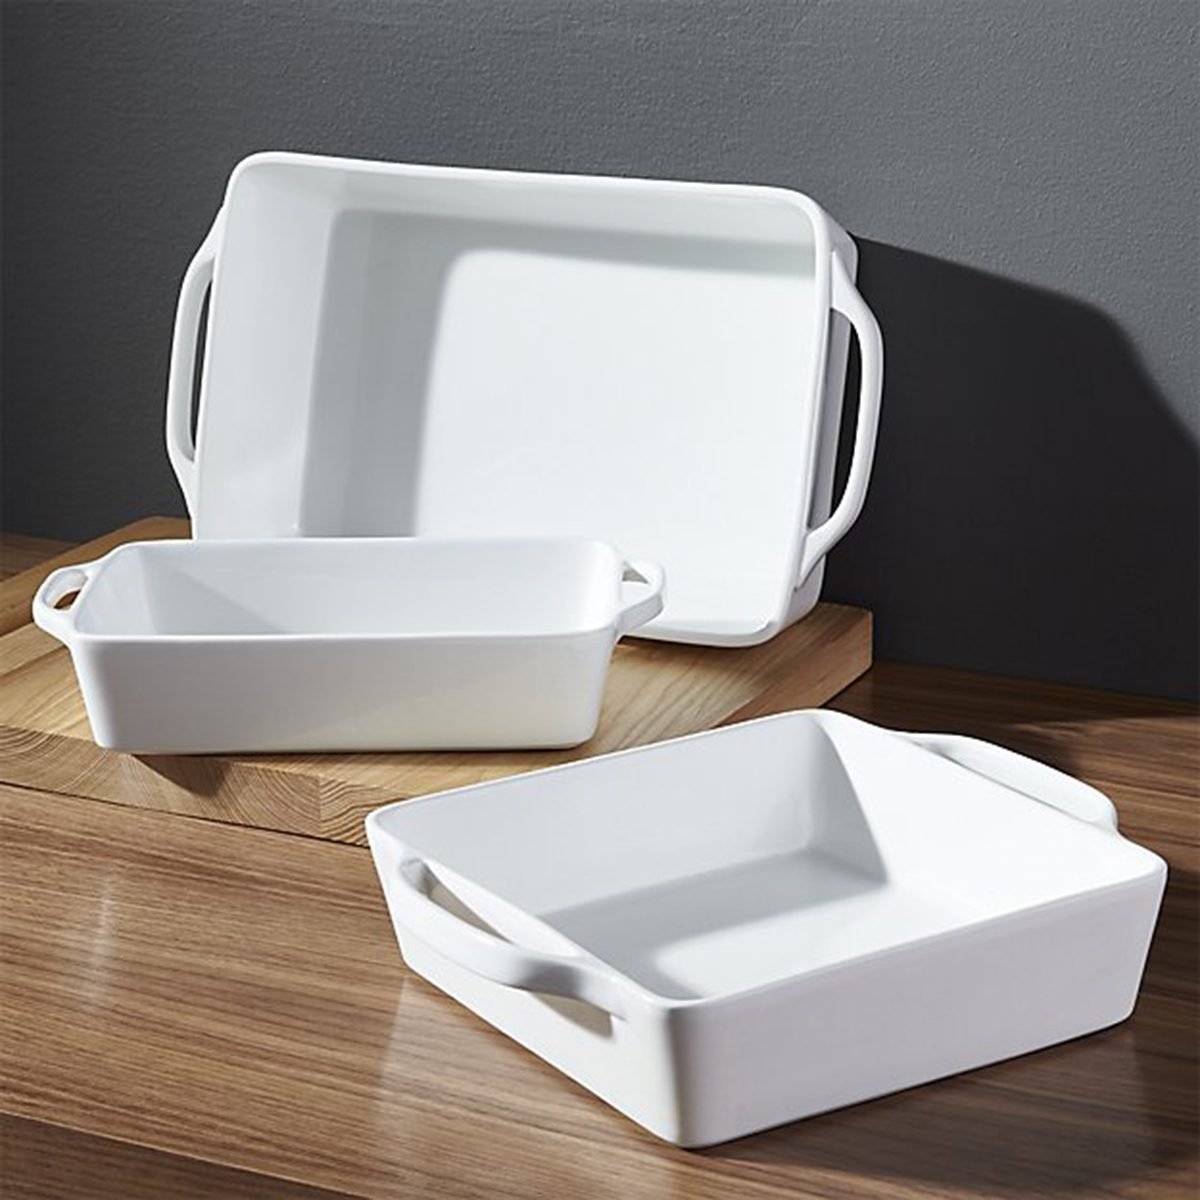 Nordic Ware Square 9x9 Cake Pan with Lid